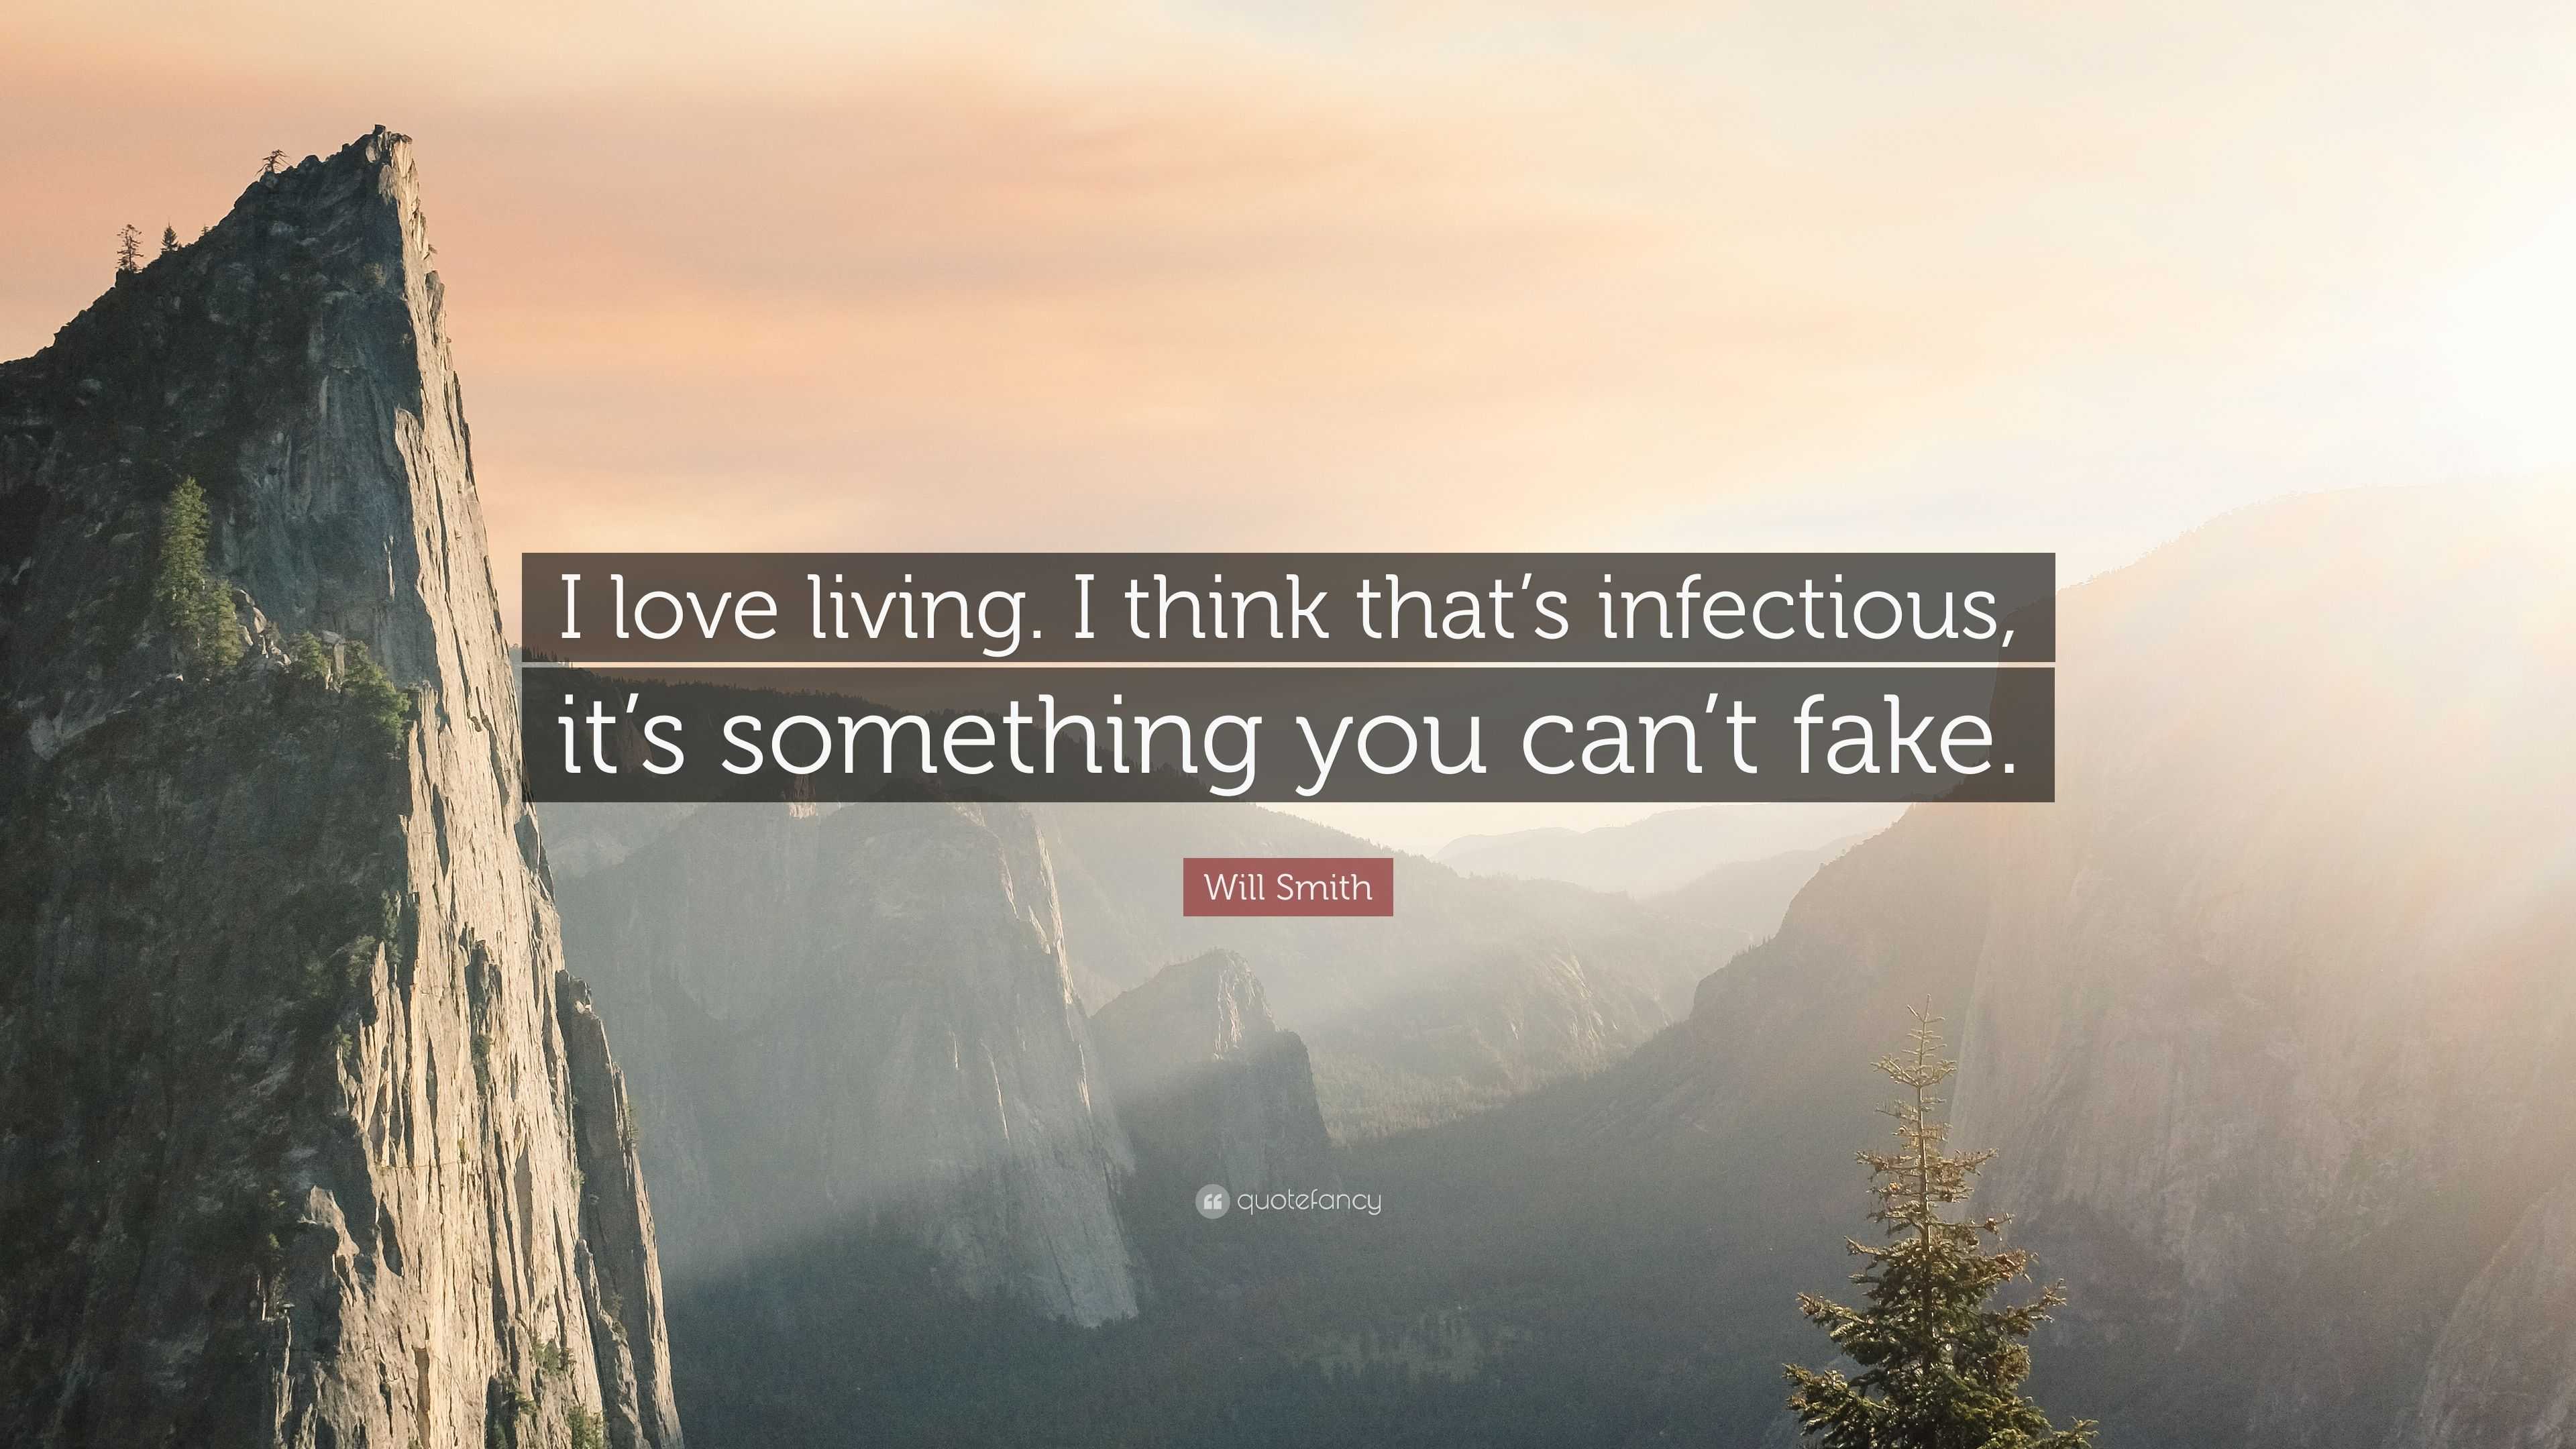 Will Smith Quote “I love living I think that s infectious it s something